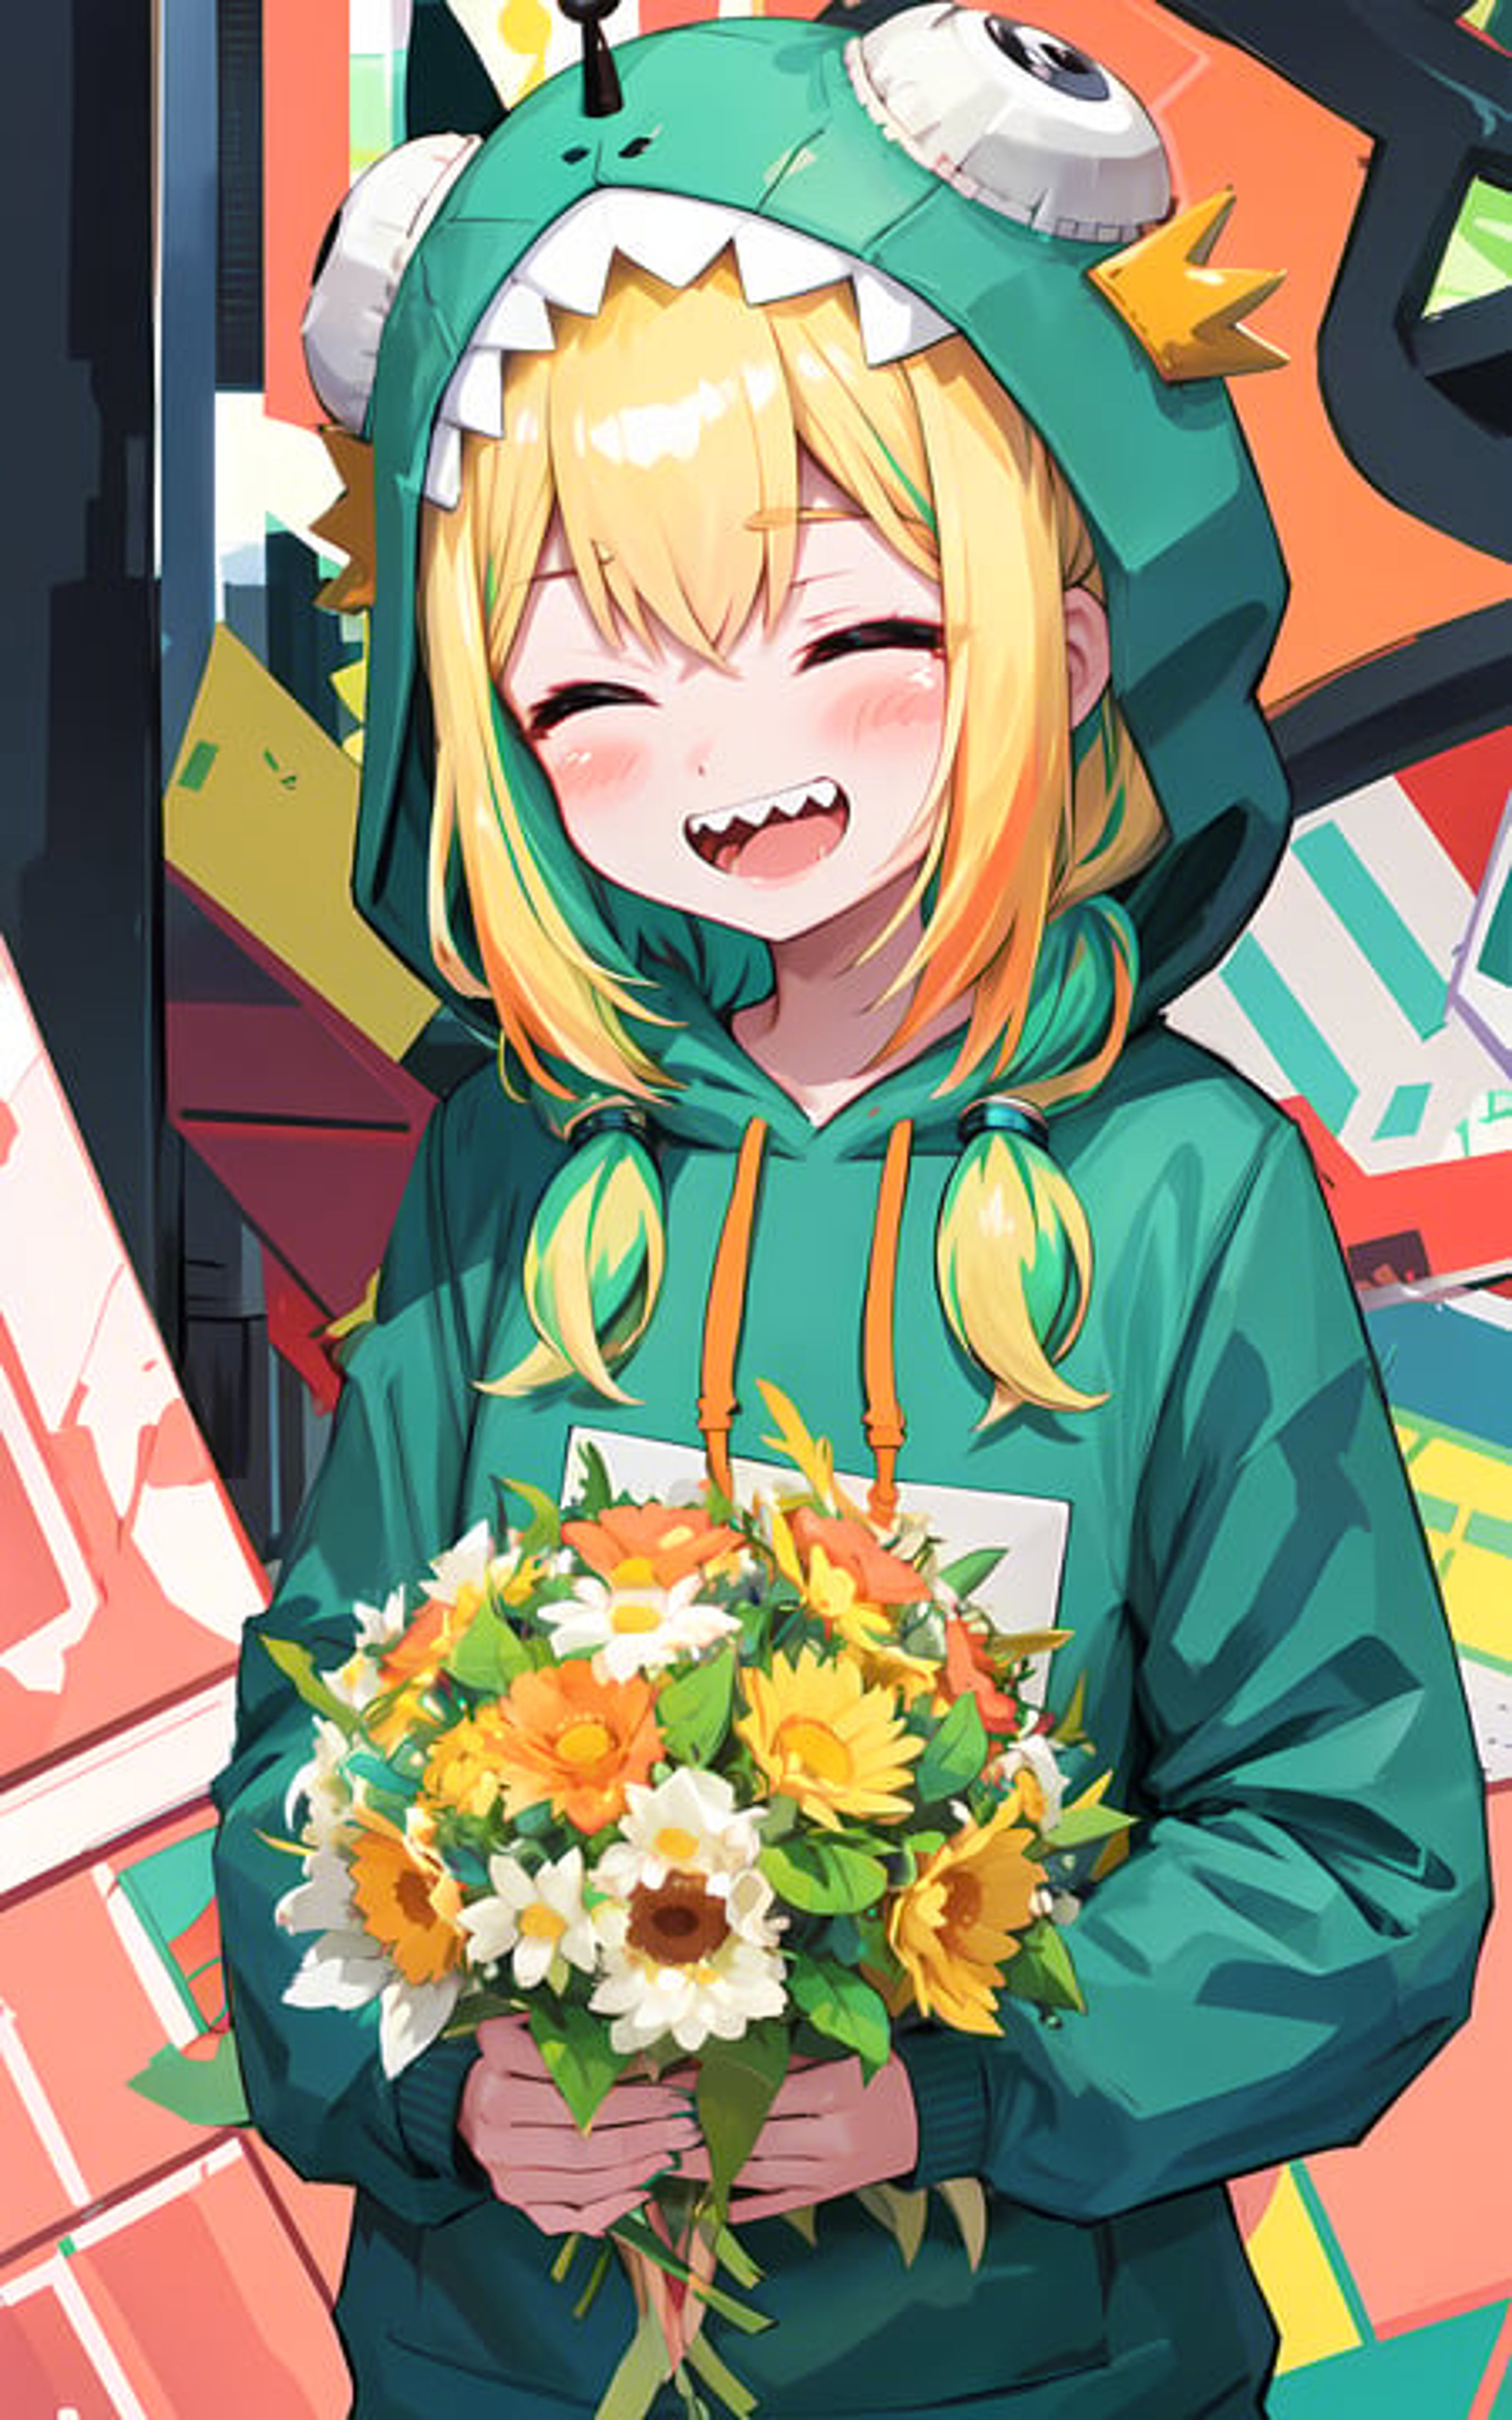 A smiling girl holding a bouquet of flowers and wearing a green hoodie.